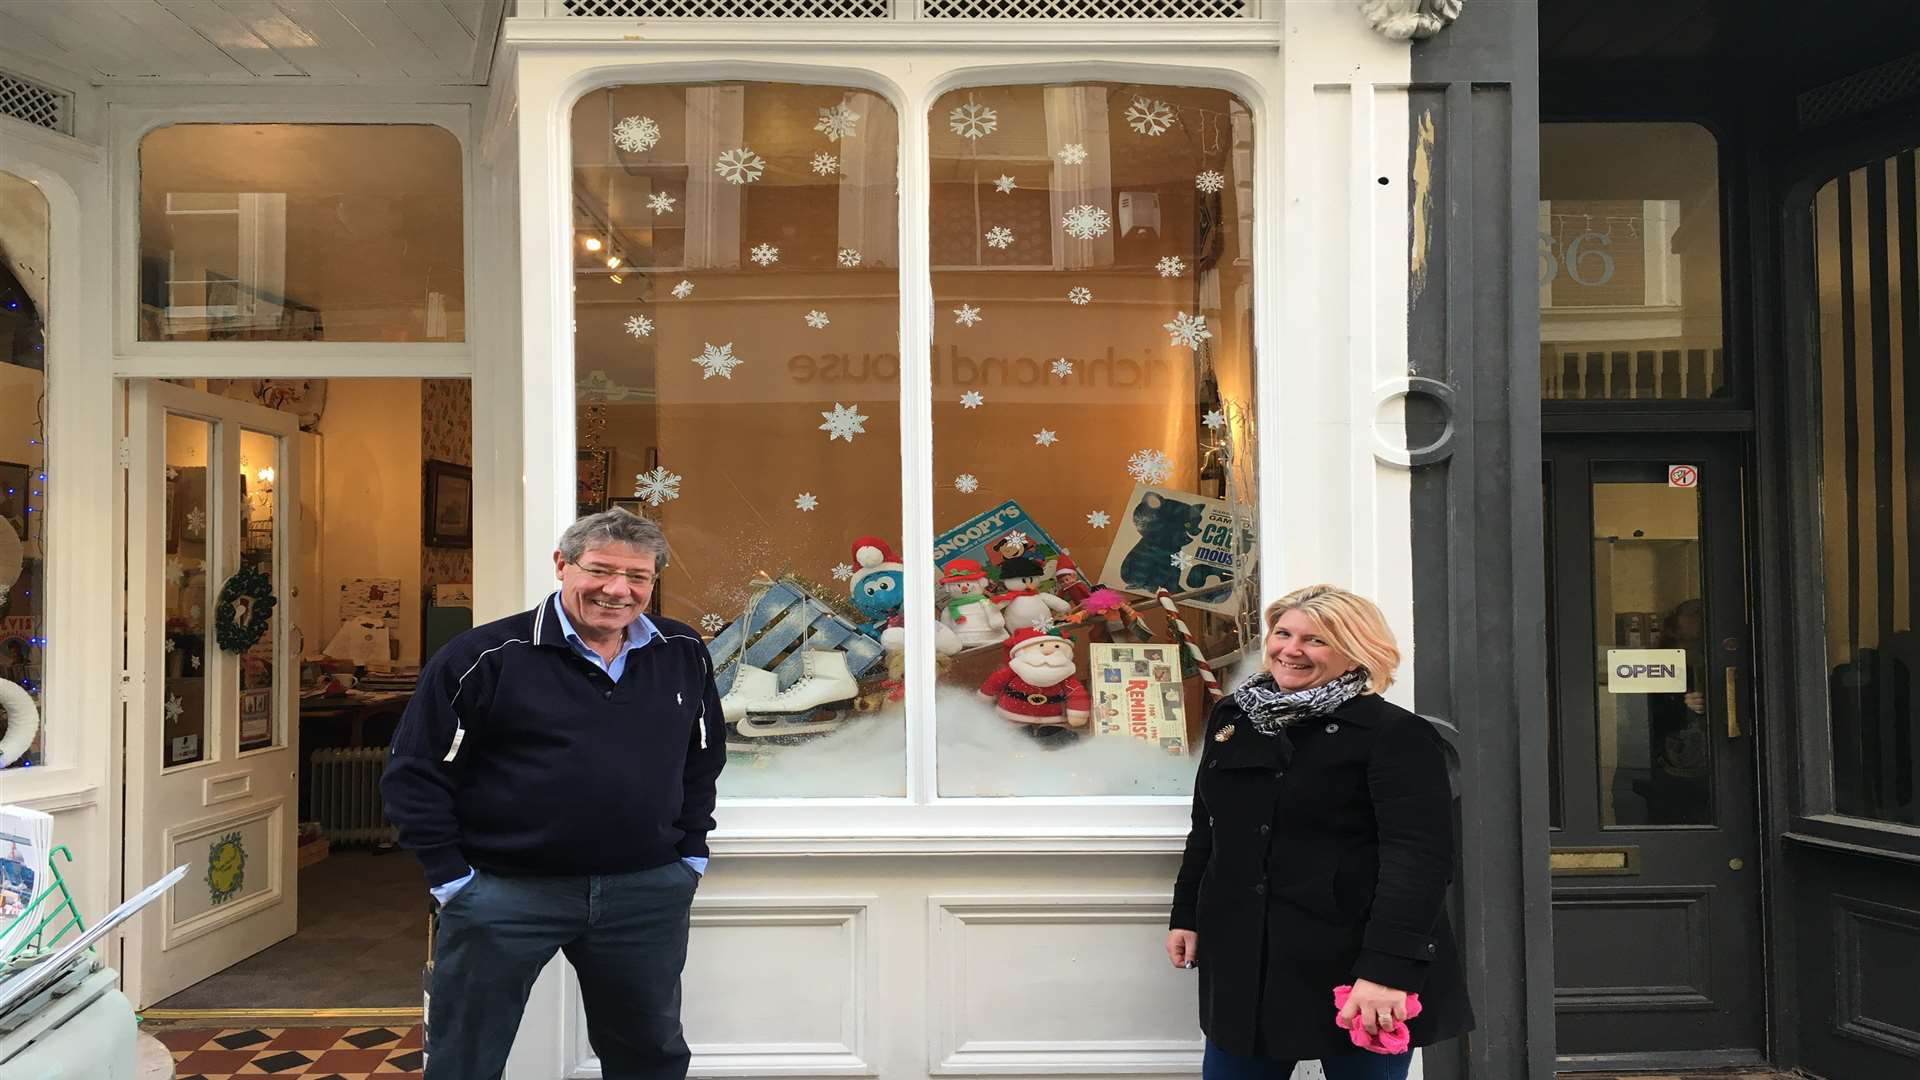 Owner of the Forget-Me-Not vintage and craft store, Sarah Cheshire (right) and colleague Richard Bastow (left), pictured in front of their festive window